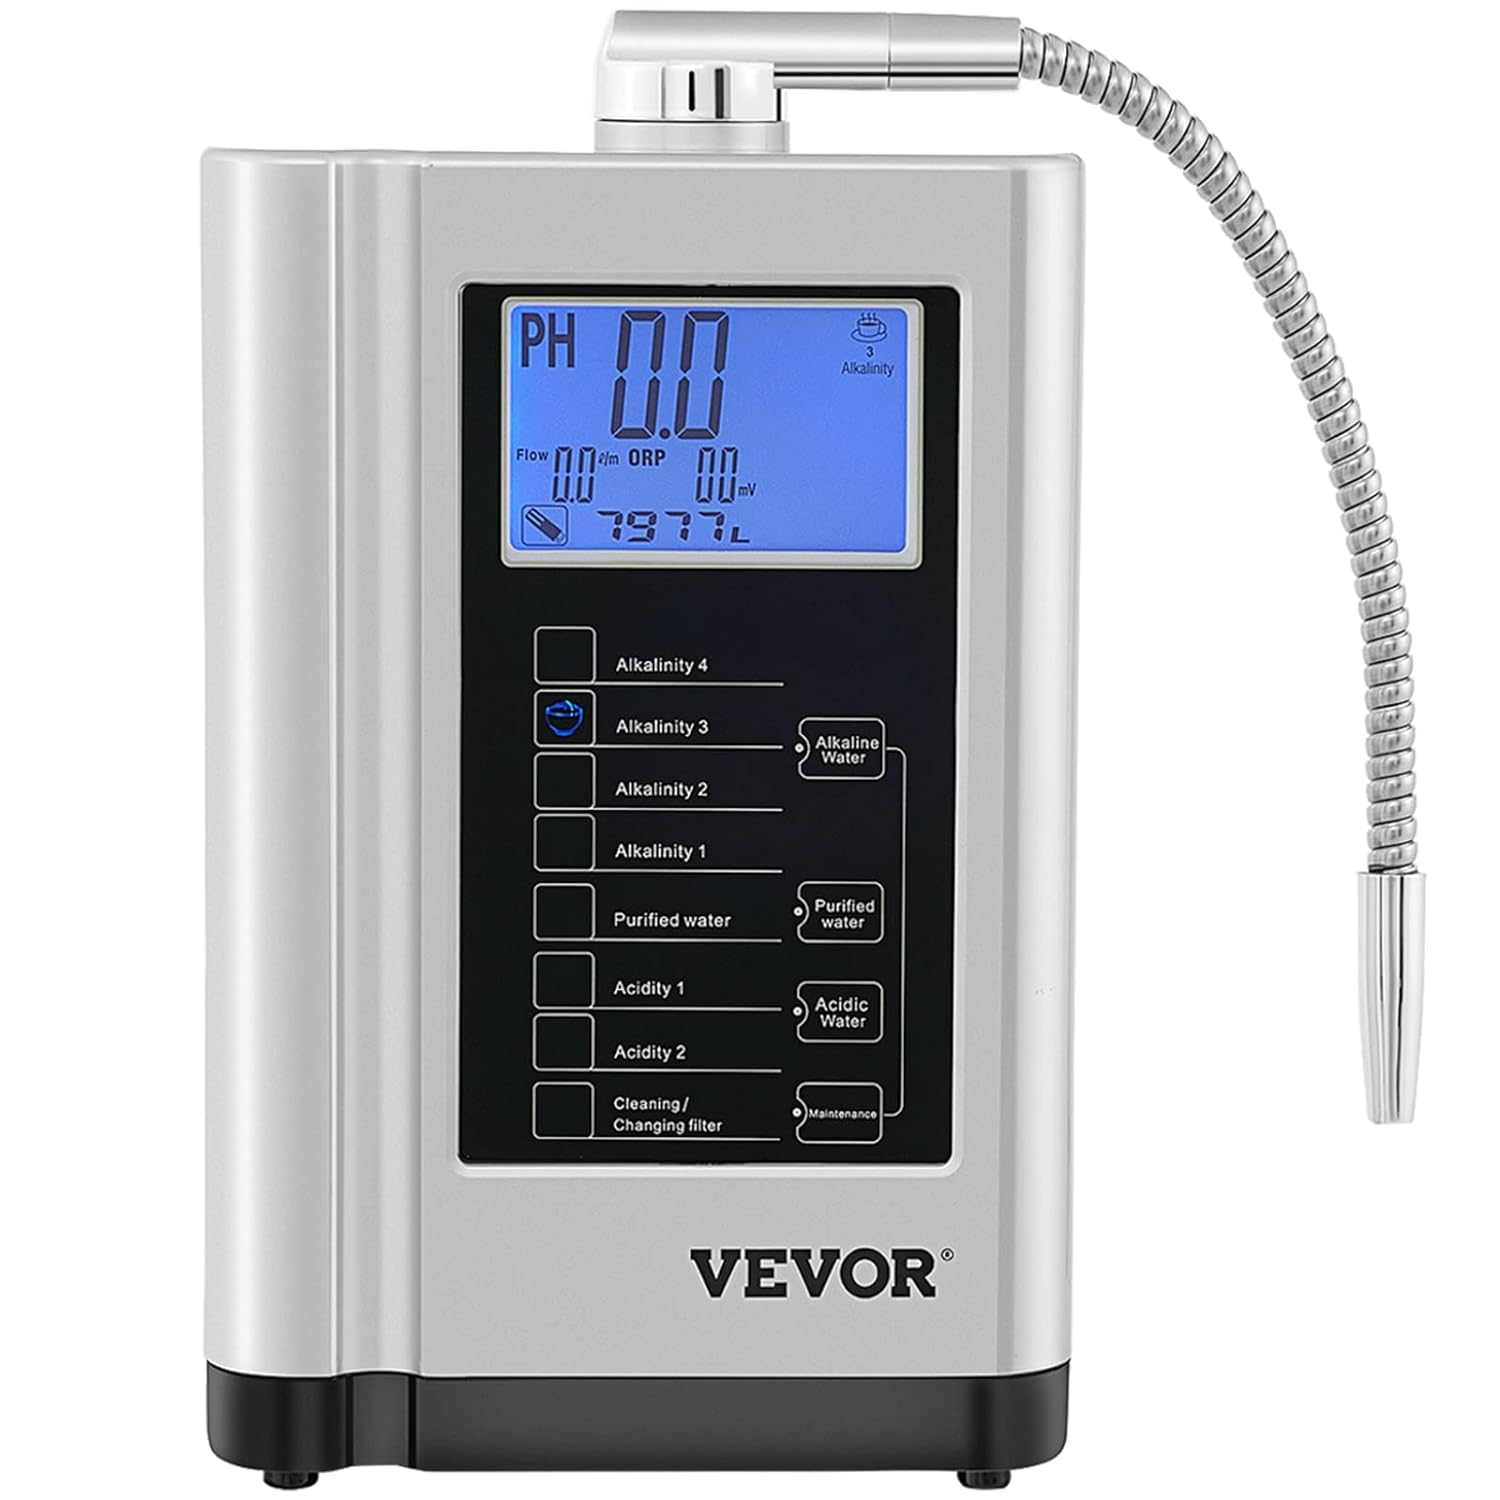 VEVOR Water Ionizer Review